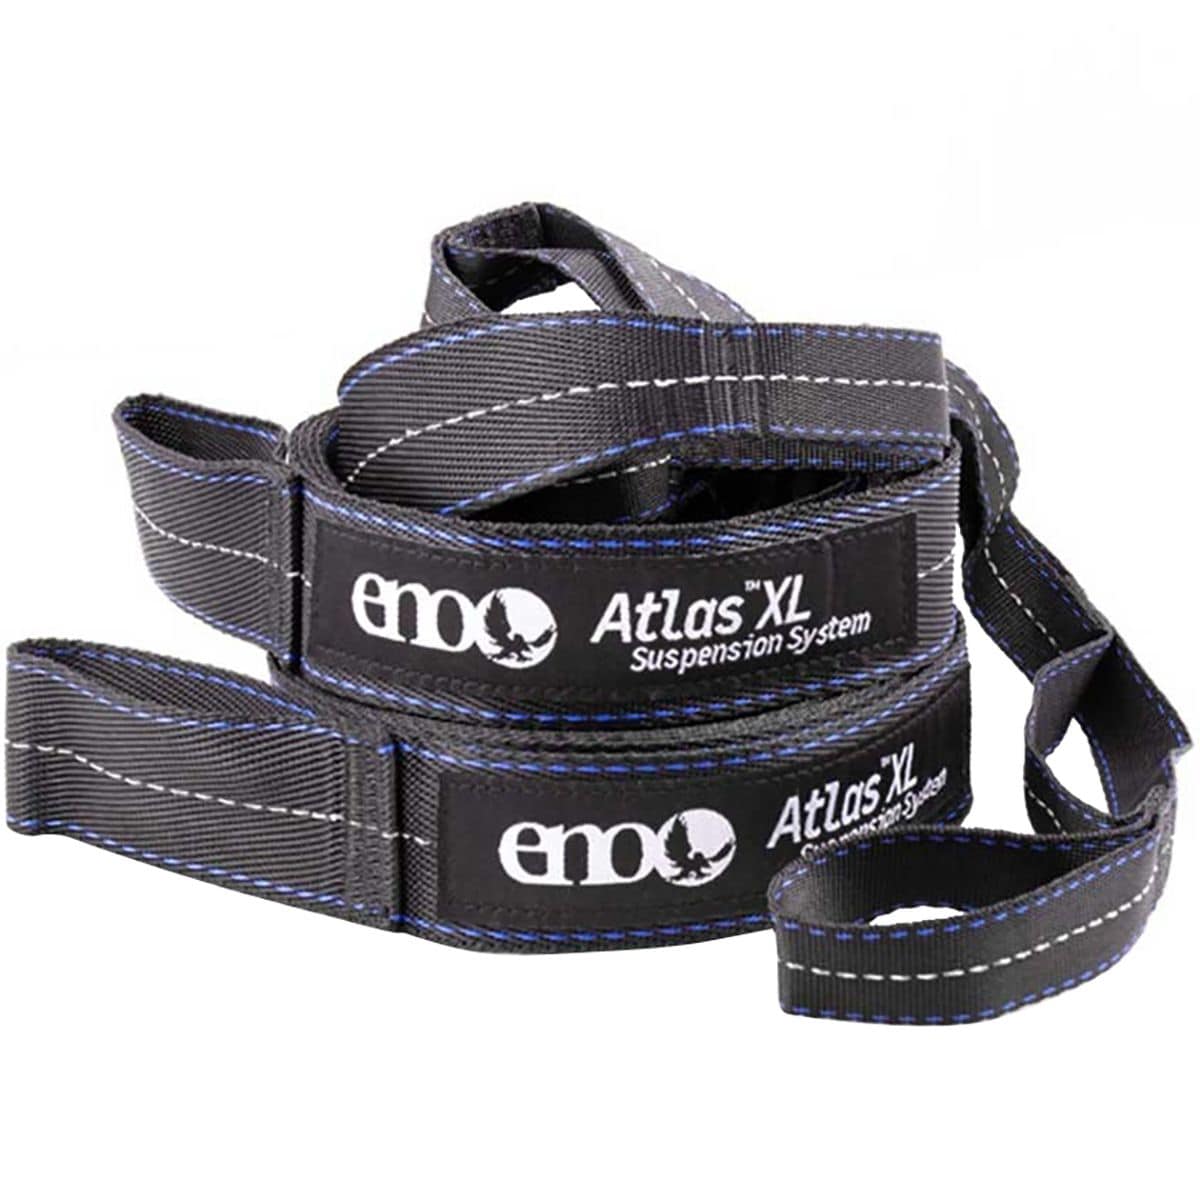 Eagles Nest Outfitters Atlas XL Suspension Strap